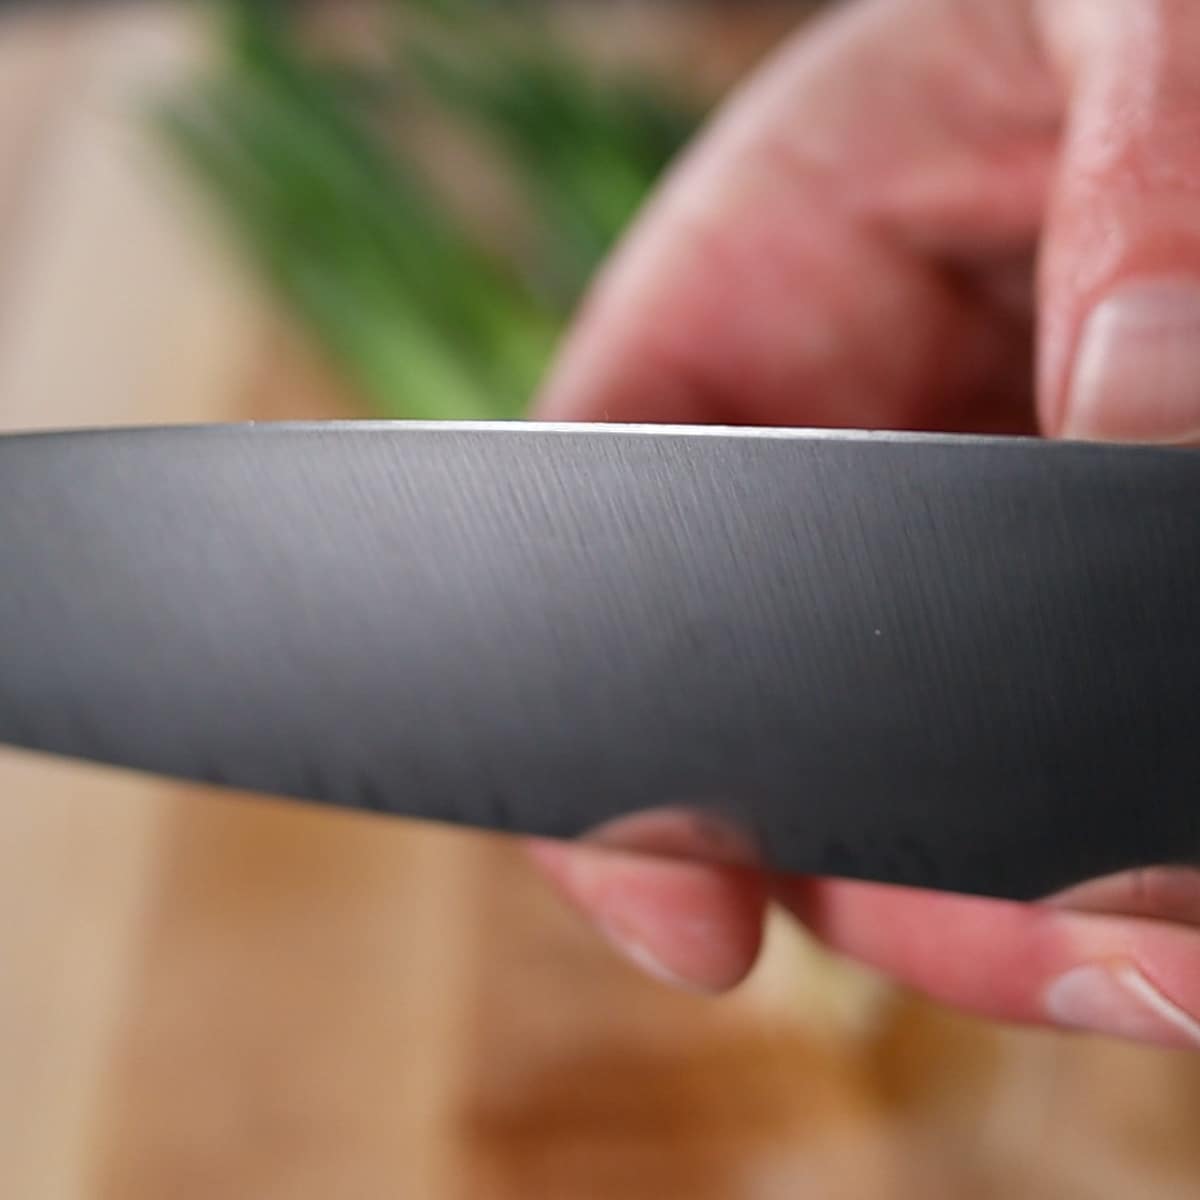 Showing the sharp blade of the knife.